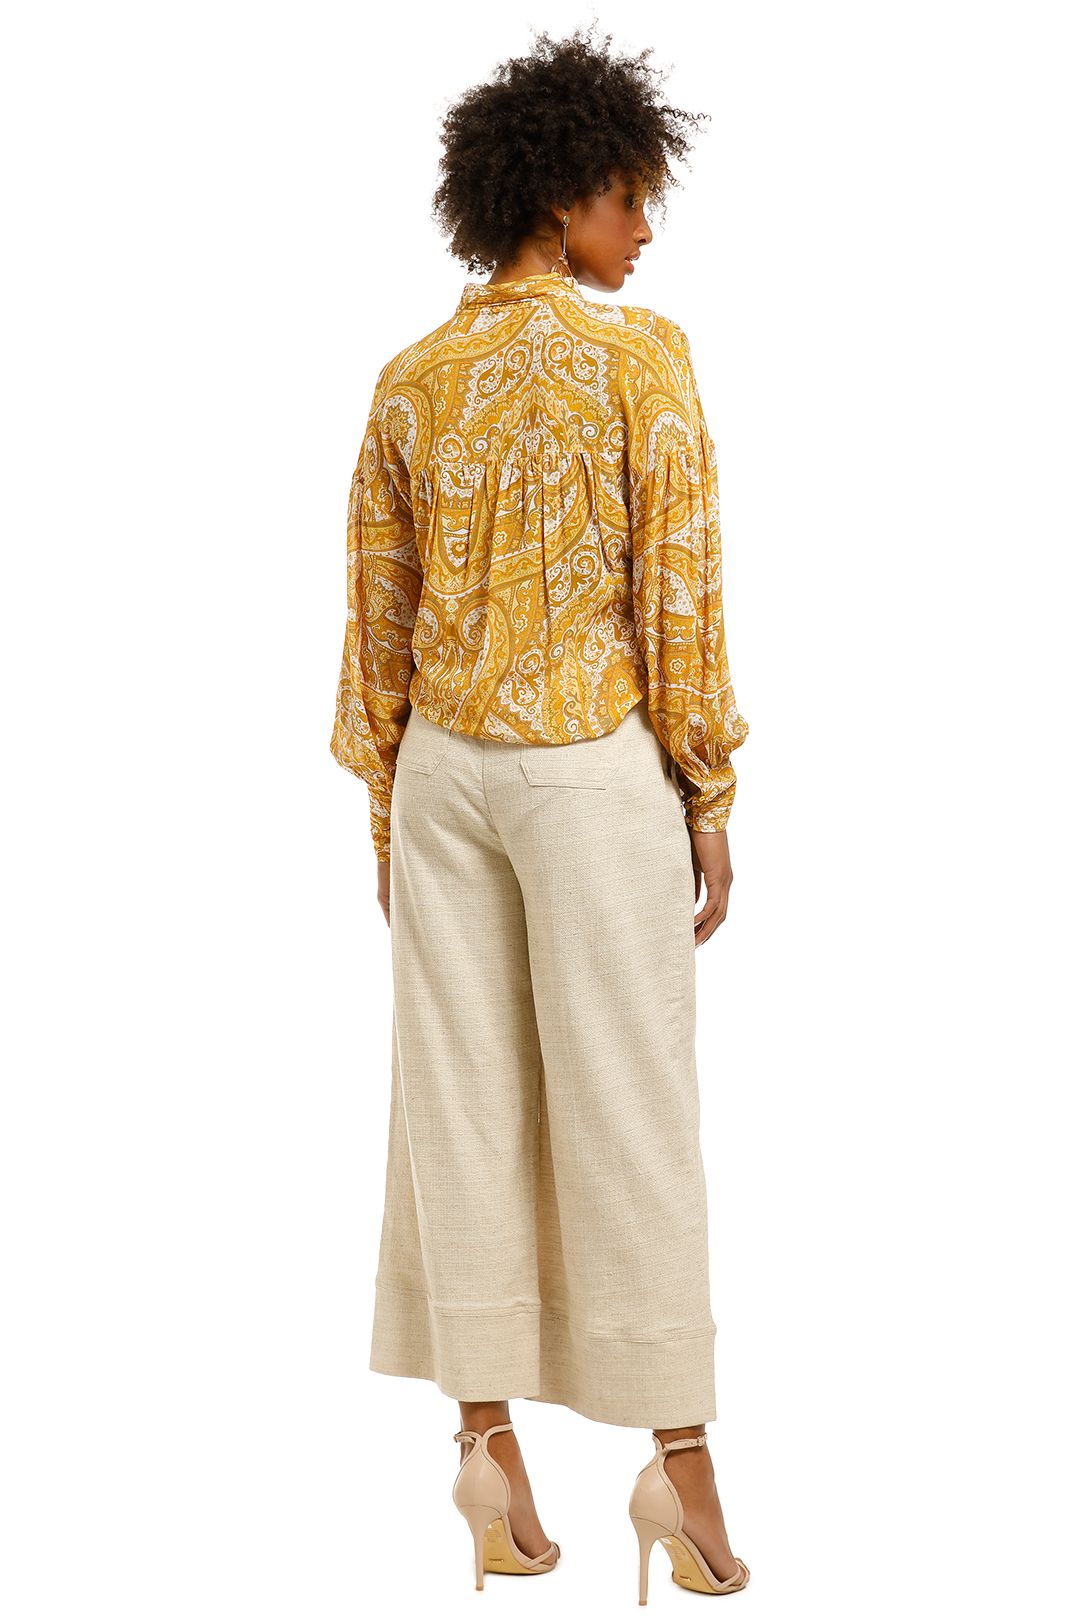 Ministry-of-Style-Marigold-Top-Print-Back